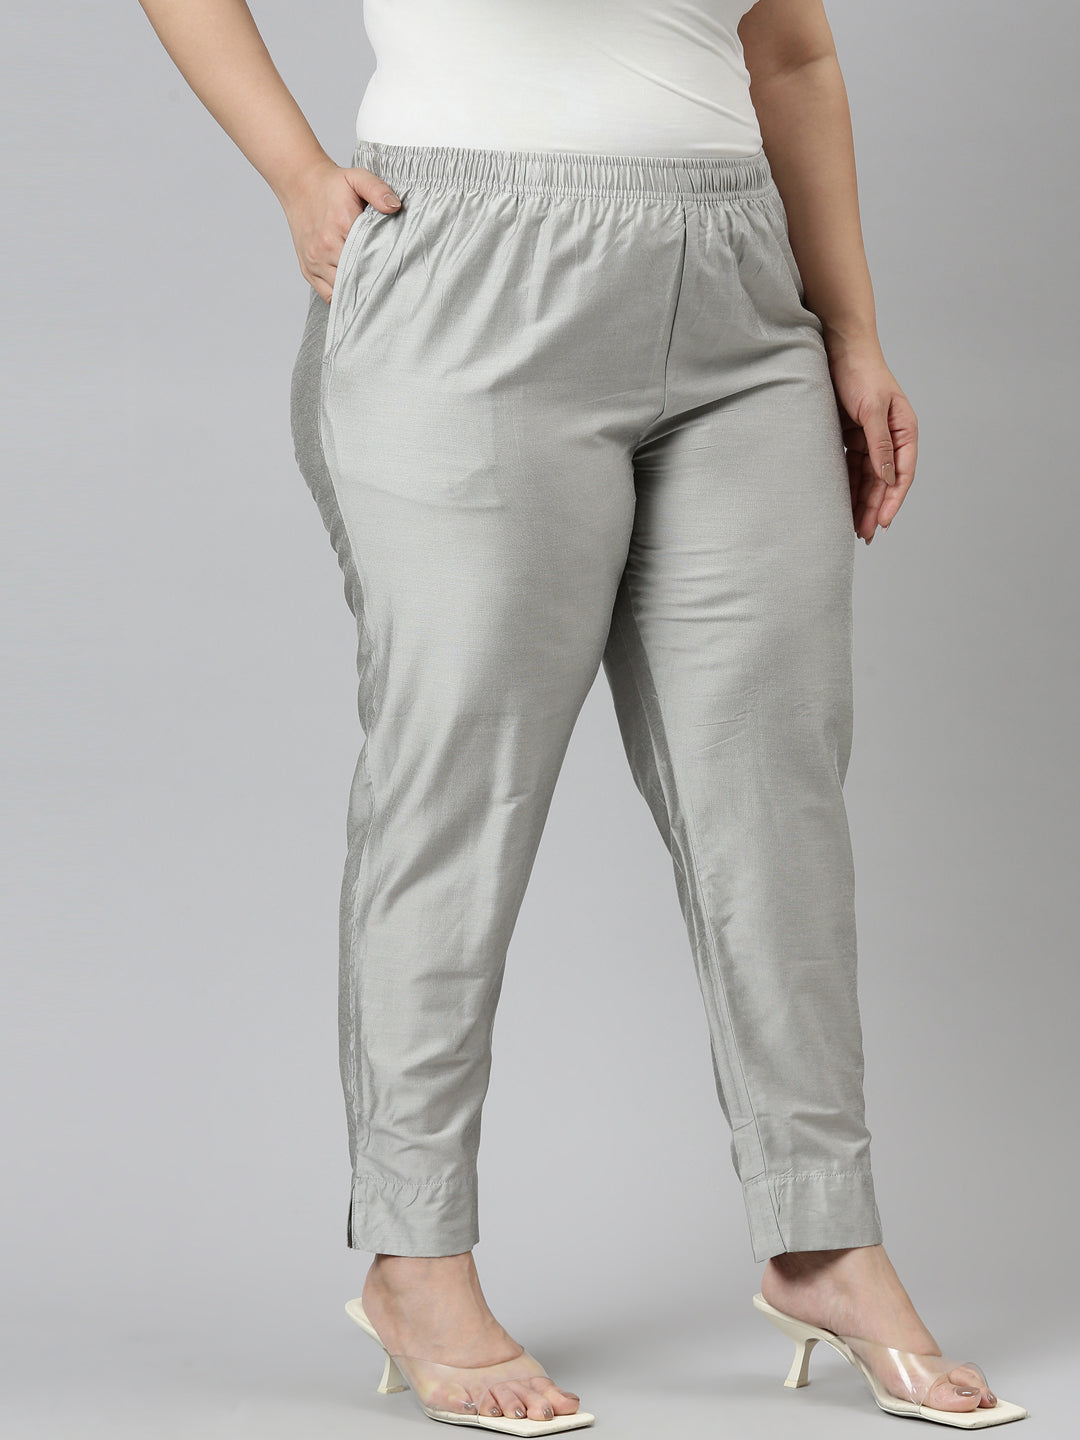 Pullon jersey trousers  Silvercoloured  Ladies  HM IN